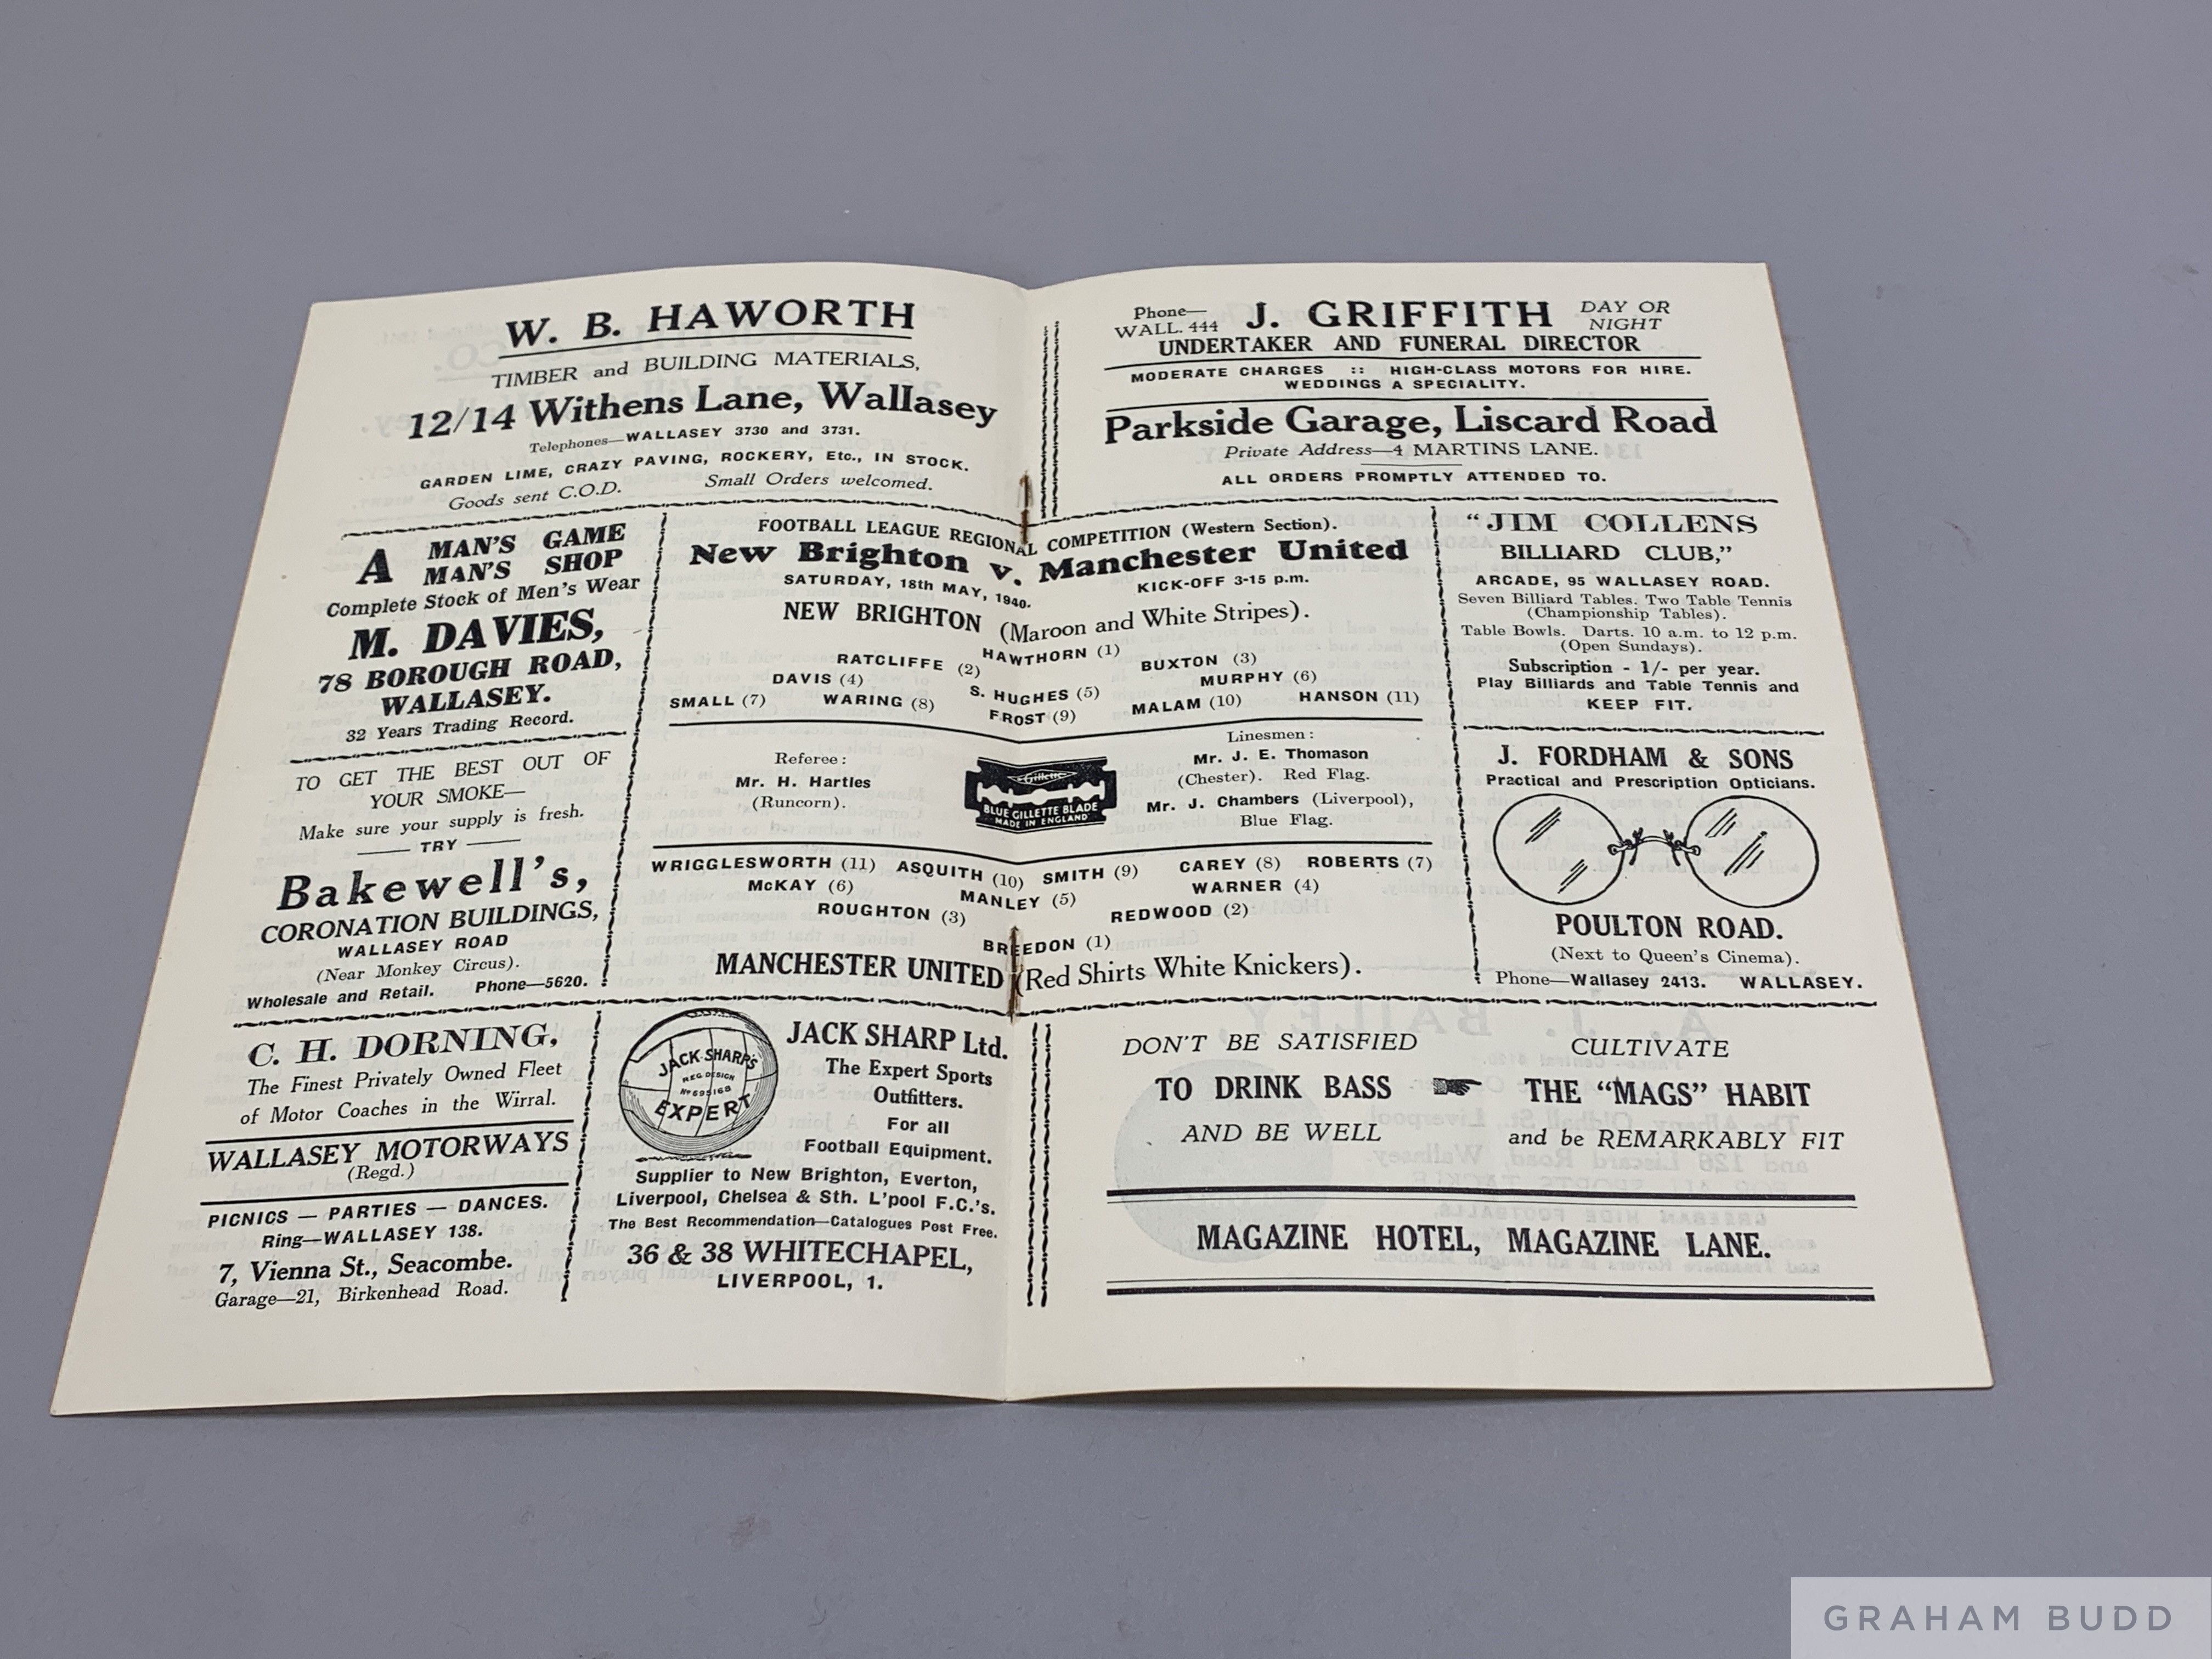 New Brighton A.F.C. v Manchester United, match programme, 18th May 1940 - Image 2 of 2